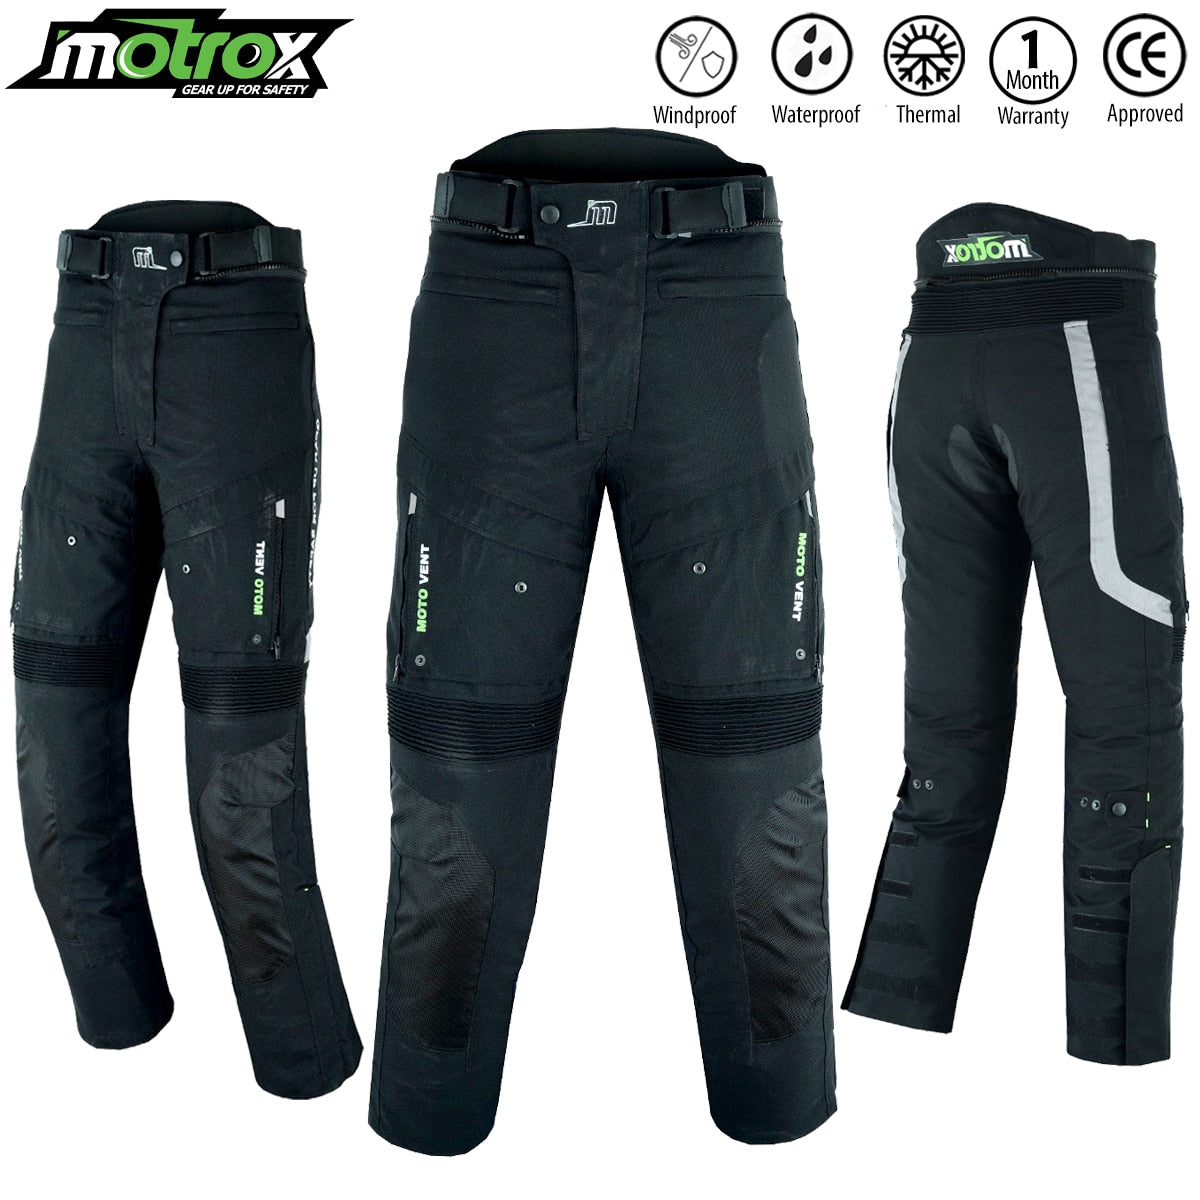 Freecycle: Womens waterproof motorcycle trousers AWAITING COLLECTION